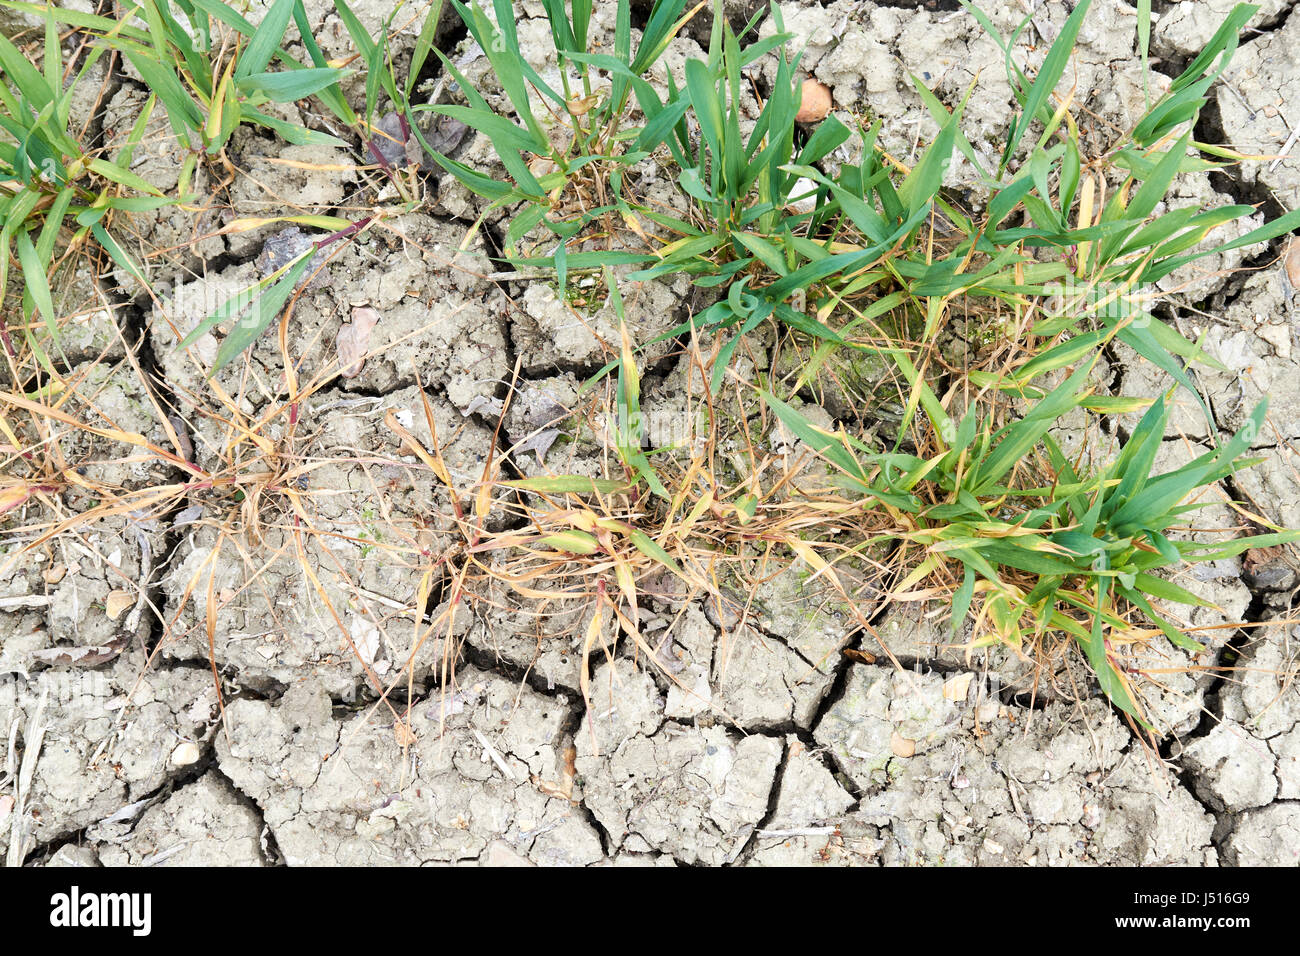 Parched desiccated agricultural soil and wilting wheat crop due to dry climatic conditions, UK. Stock Photo